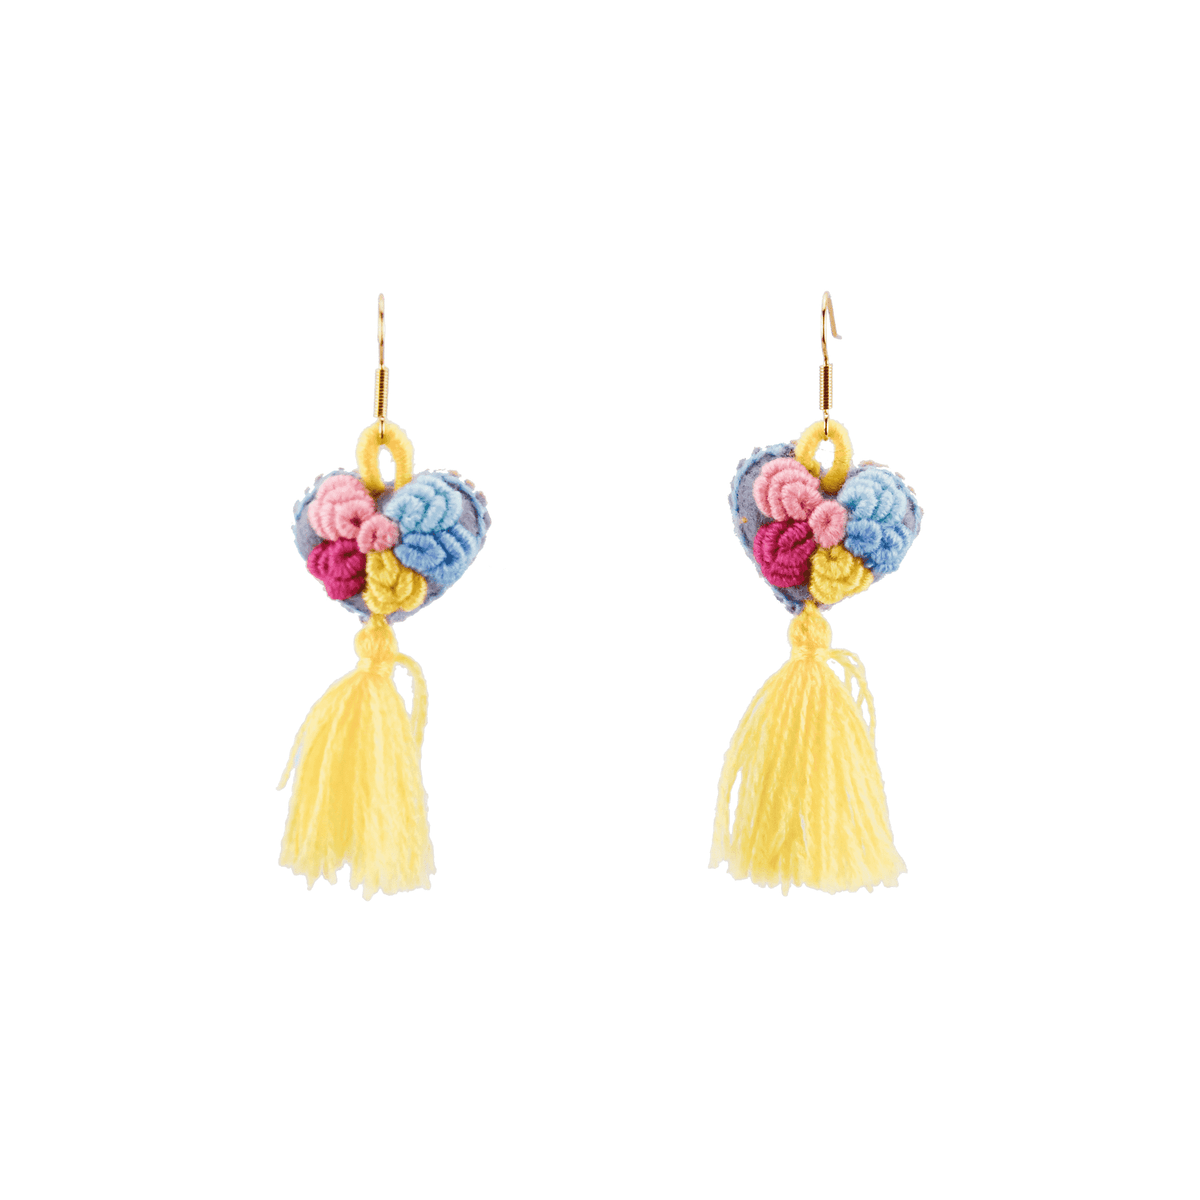 The Love-ly Earrings - Small - Josephine Alexander Collective